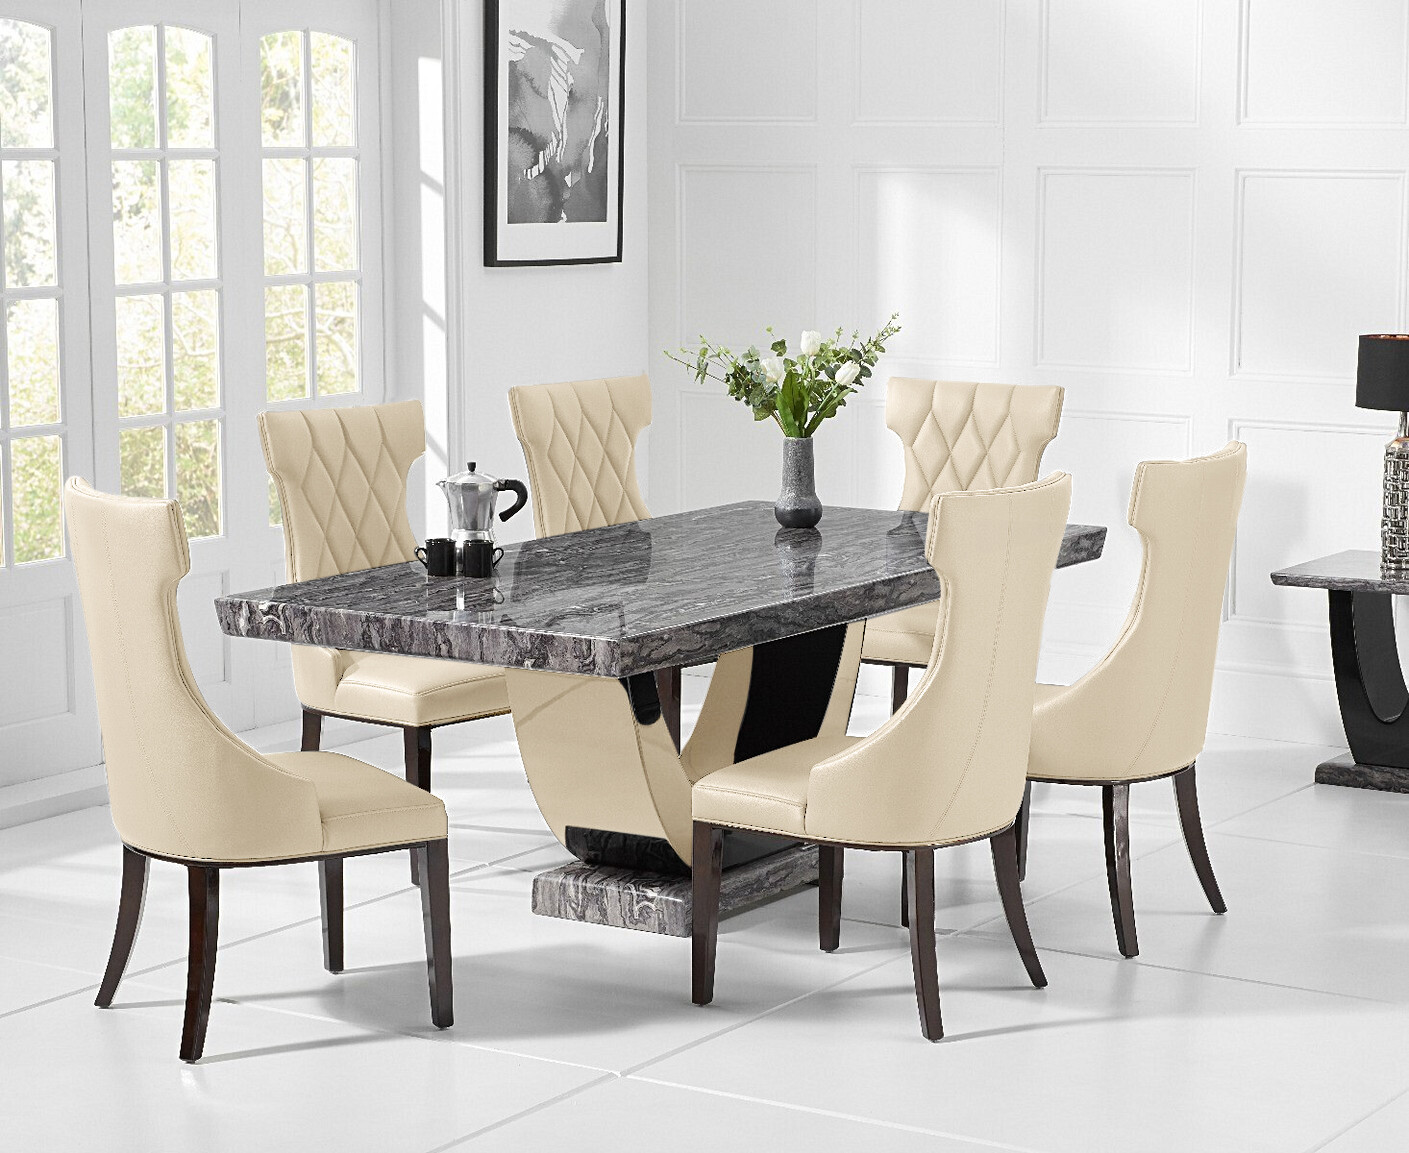 Photo 2 of Raphael 170cm dark grey pedestal marble dining table with 6 cream sophia chairs